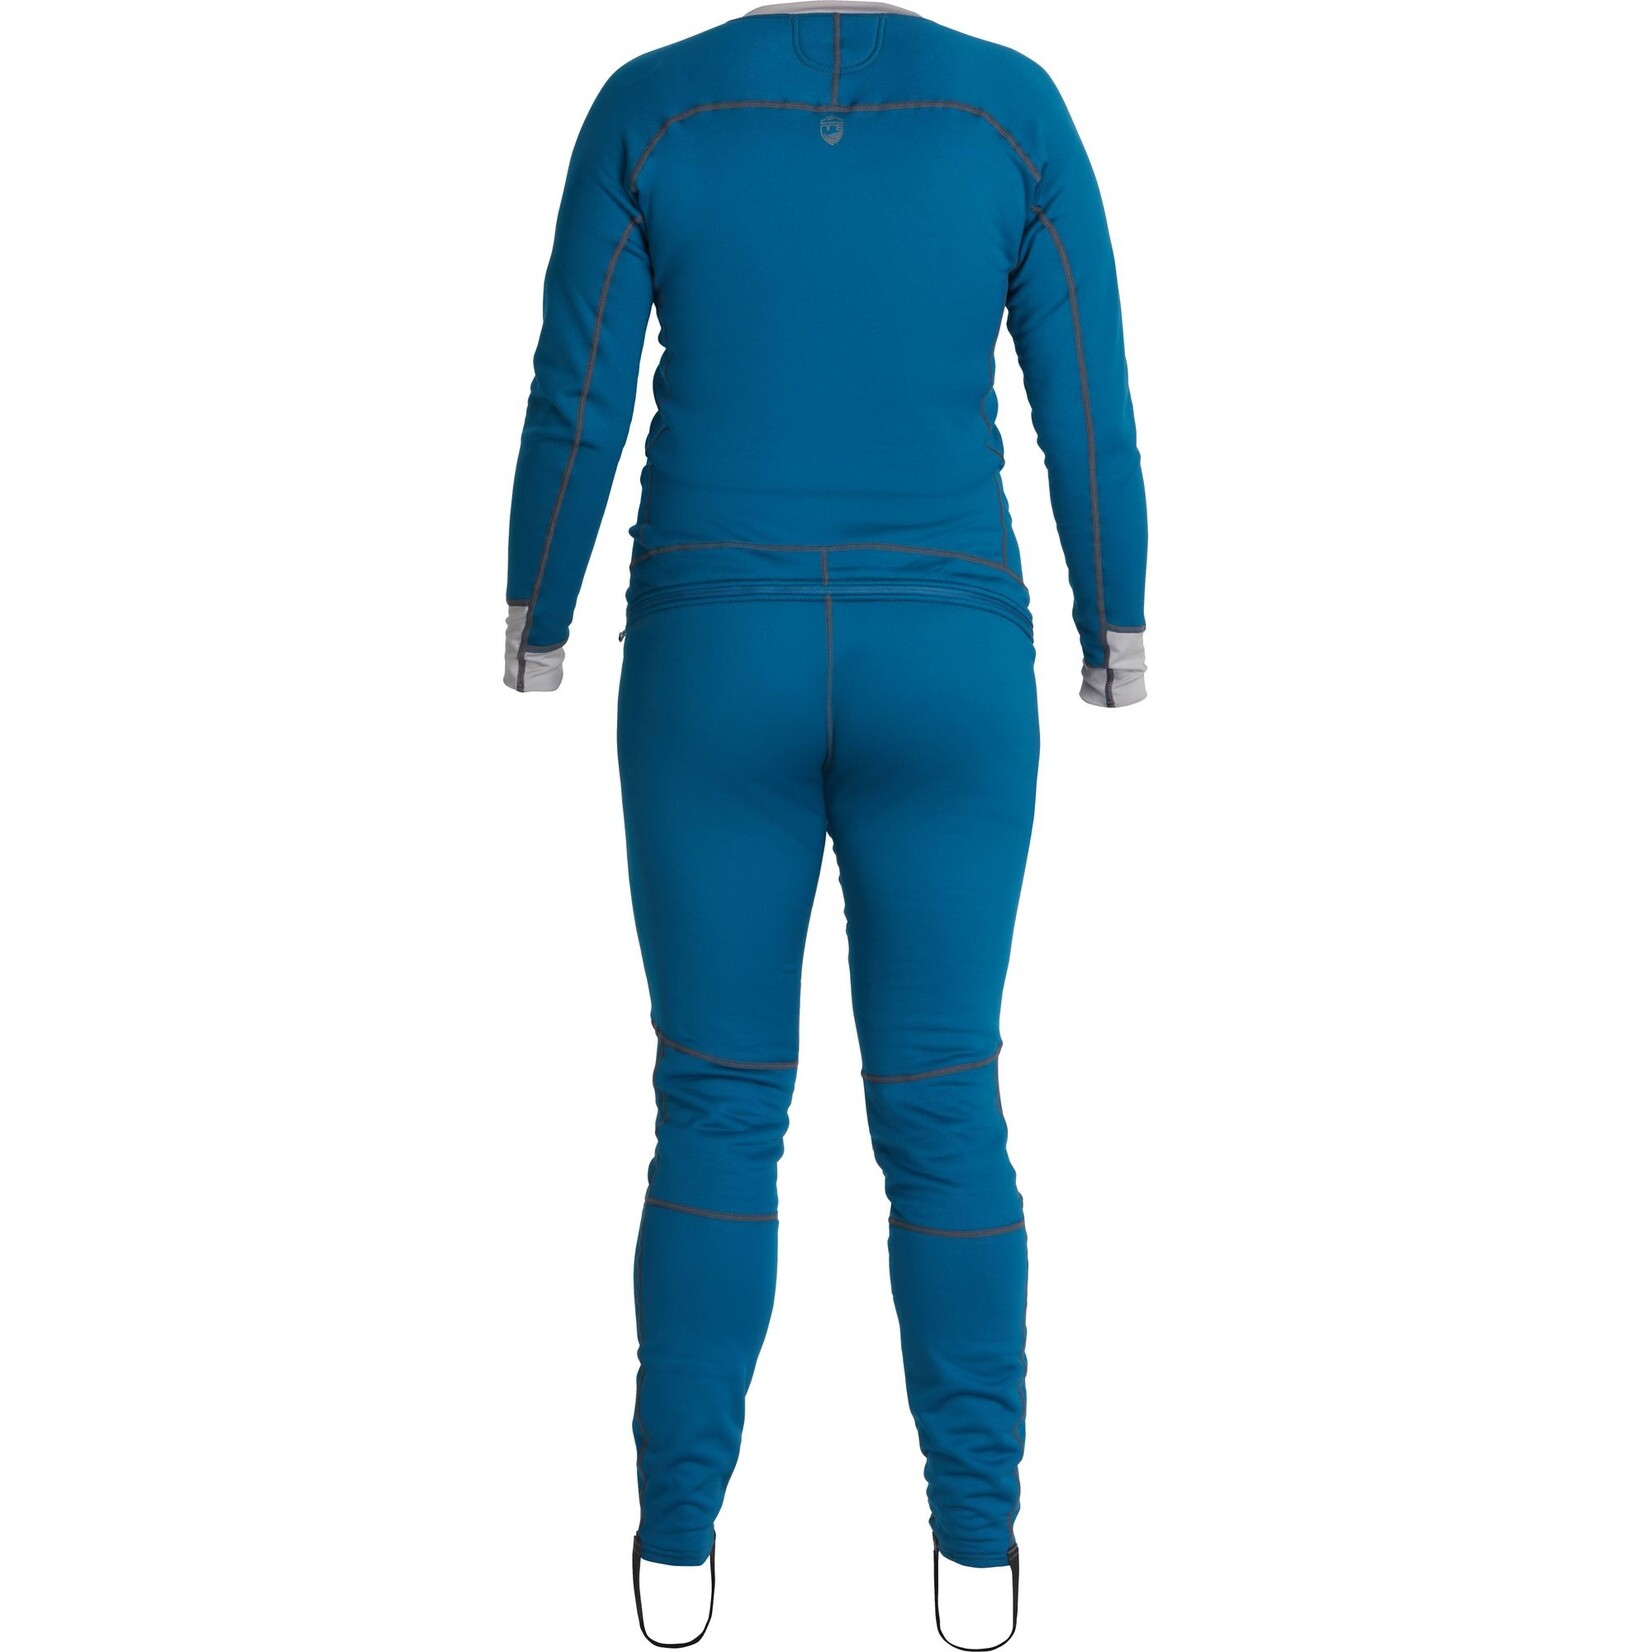 NRS - Women's Expedition Weight Union Suit